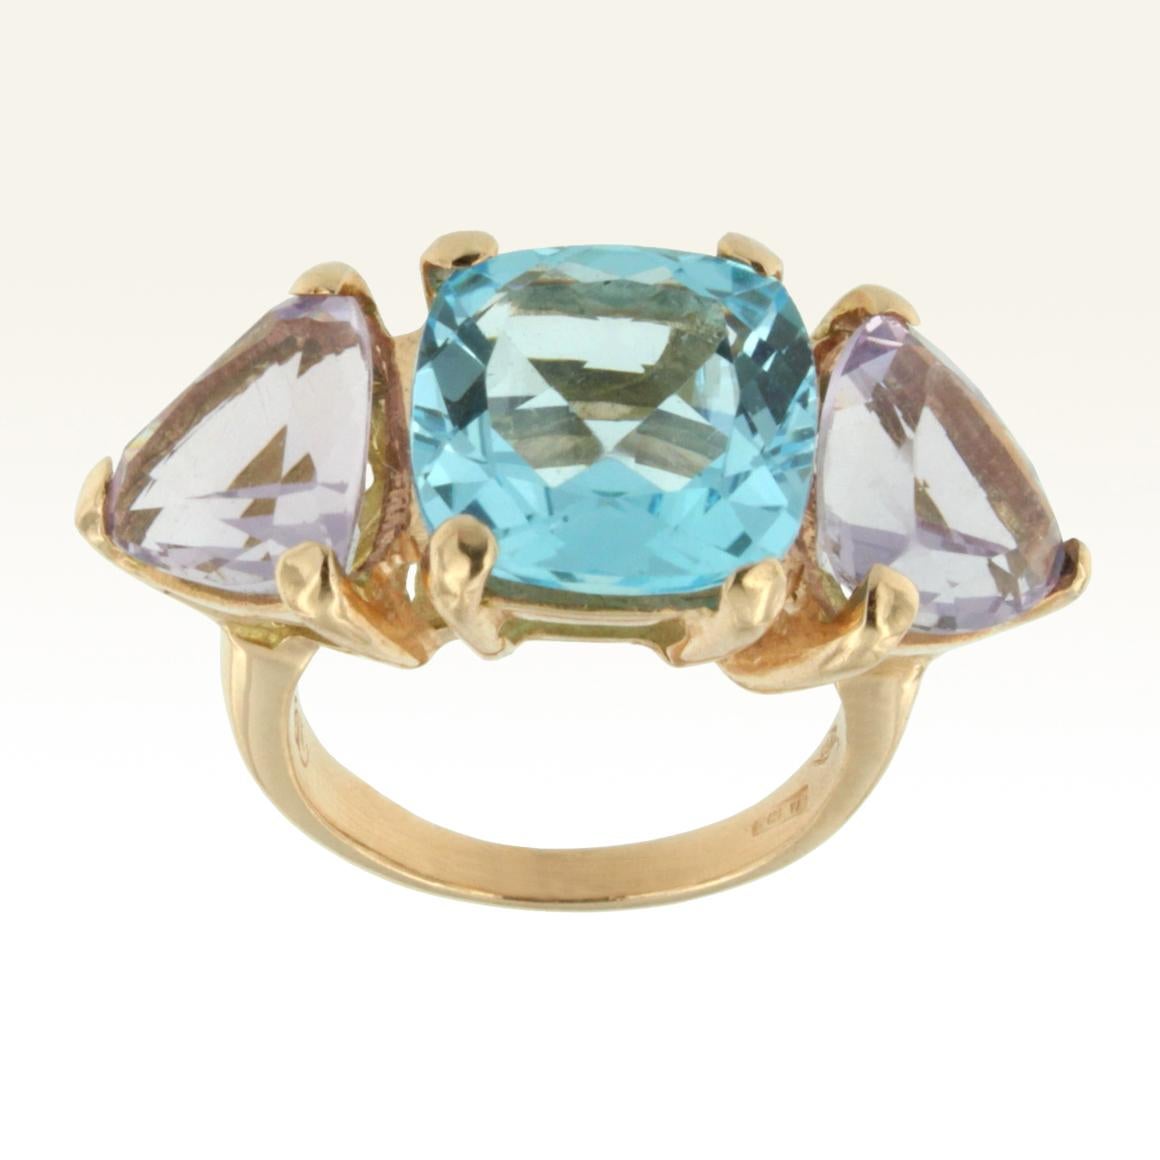 Ring in 18k rose gold with Blue Topaz (square cut, size: 12x12 mm) and light Amethyst (trianglular cut, size: 10x10 mm)
Don't you love the cocktail rings? We love them very much, we love the colour . Gorgeous ring with special blue topaz  and